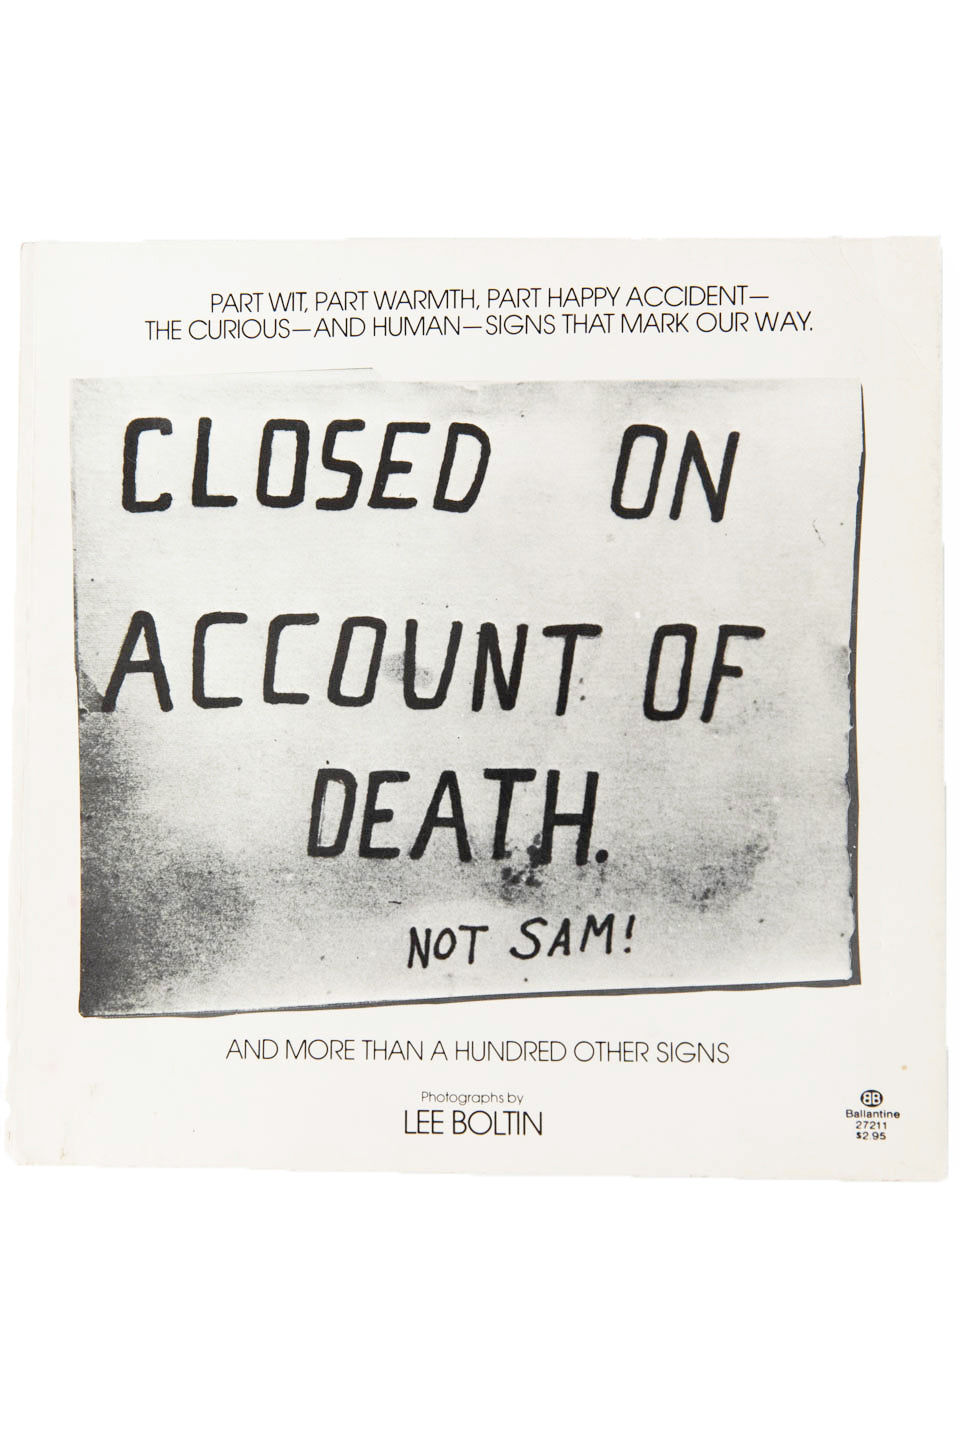 CLOSED ON ACCOUNT OF DEATH - NOT DEATH!